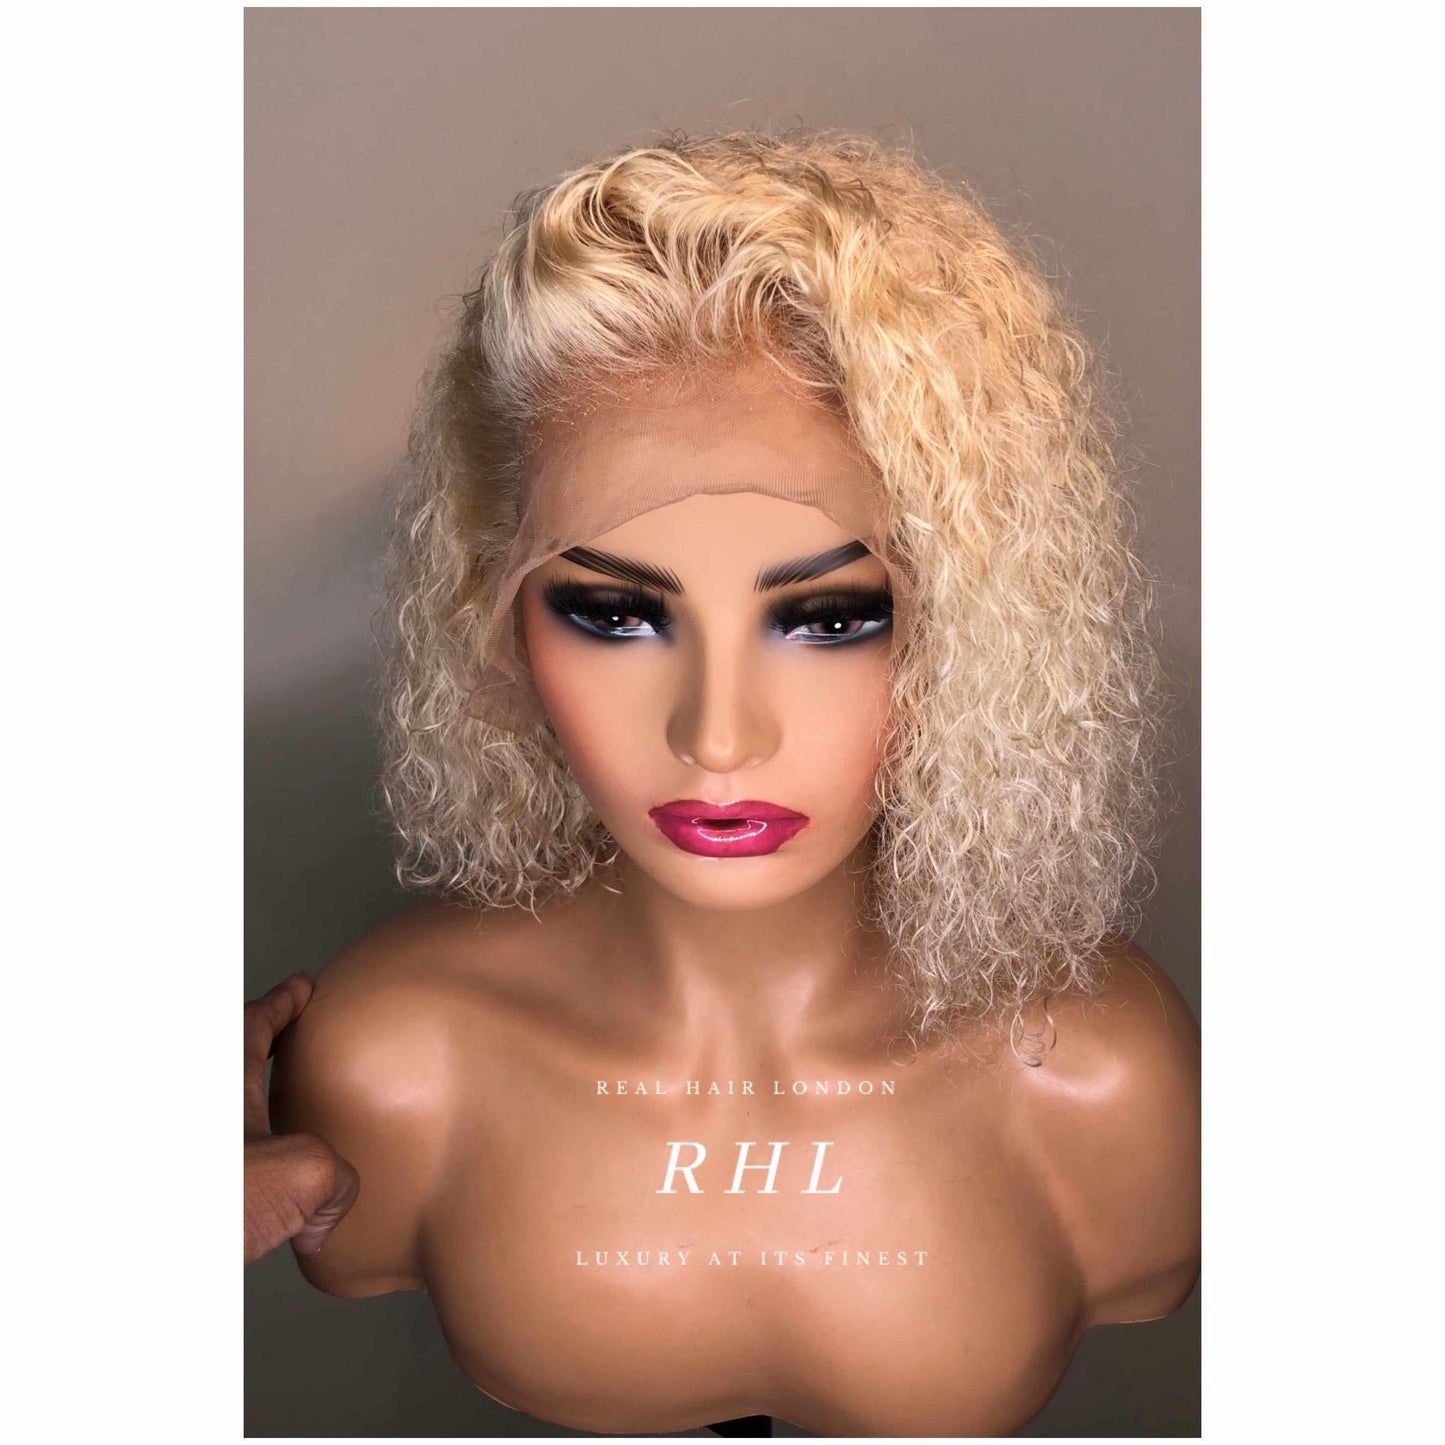 Barbie | 100% Legally Blonde | 100% Natural Curly Indian Bleached Blonde | Colour 613 Ice Gold (hard to find) | Wig Strap + Wig Comb Included-Wigs-Real Hair London-Real Hair London